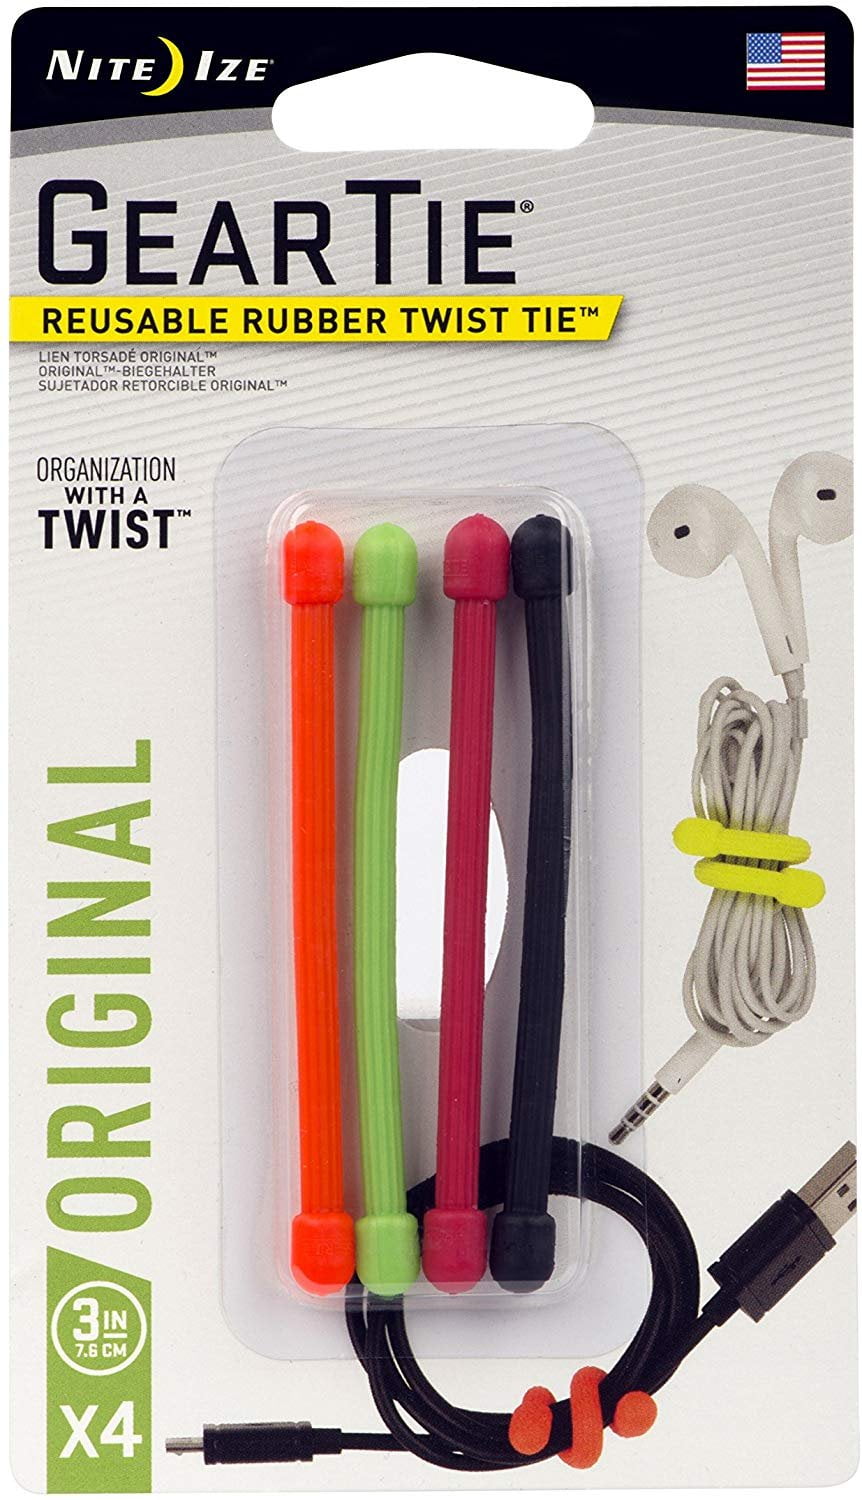 *Color Variety* Reusable Rubber Twist Tie 2-Pack Nite Ize GearTie Lot of 2 